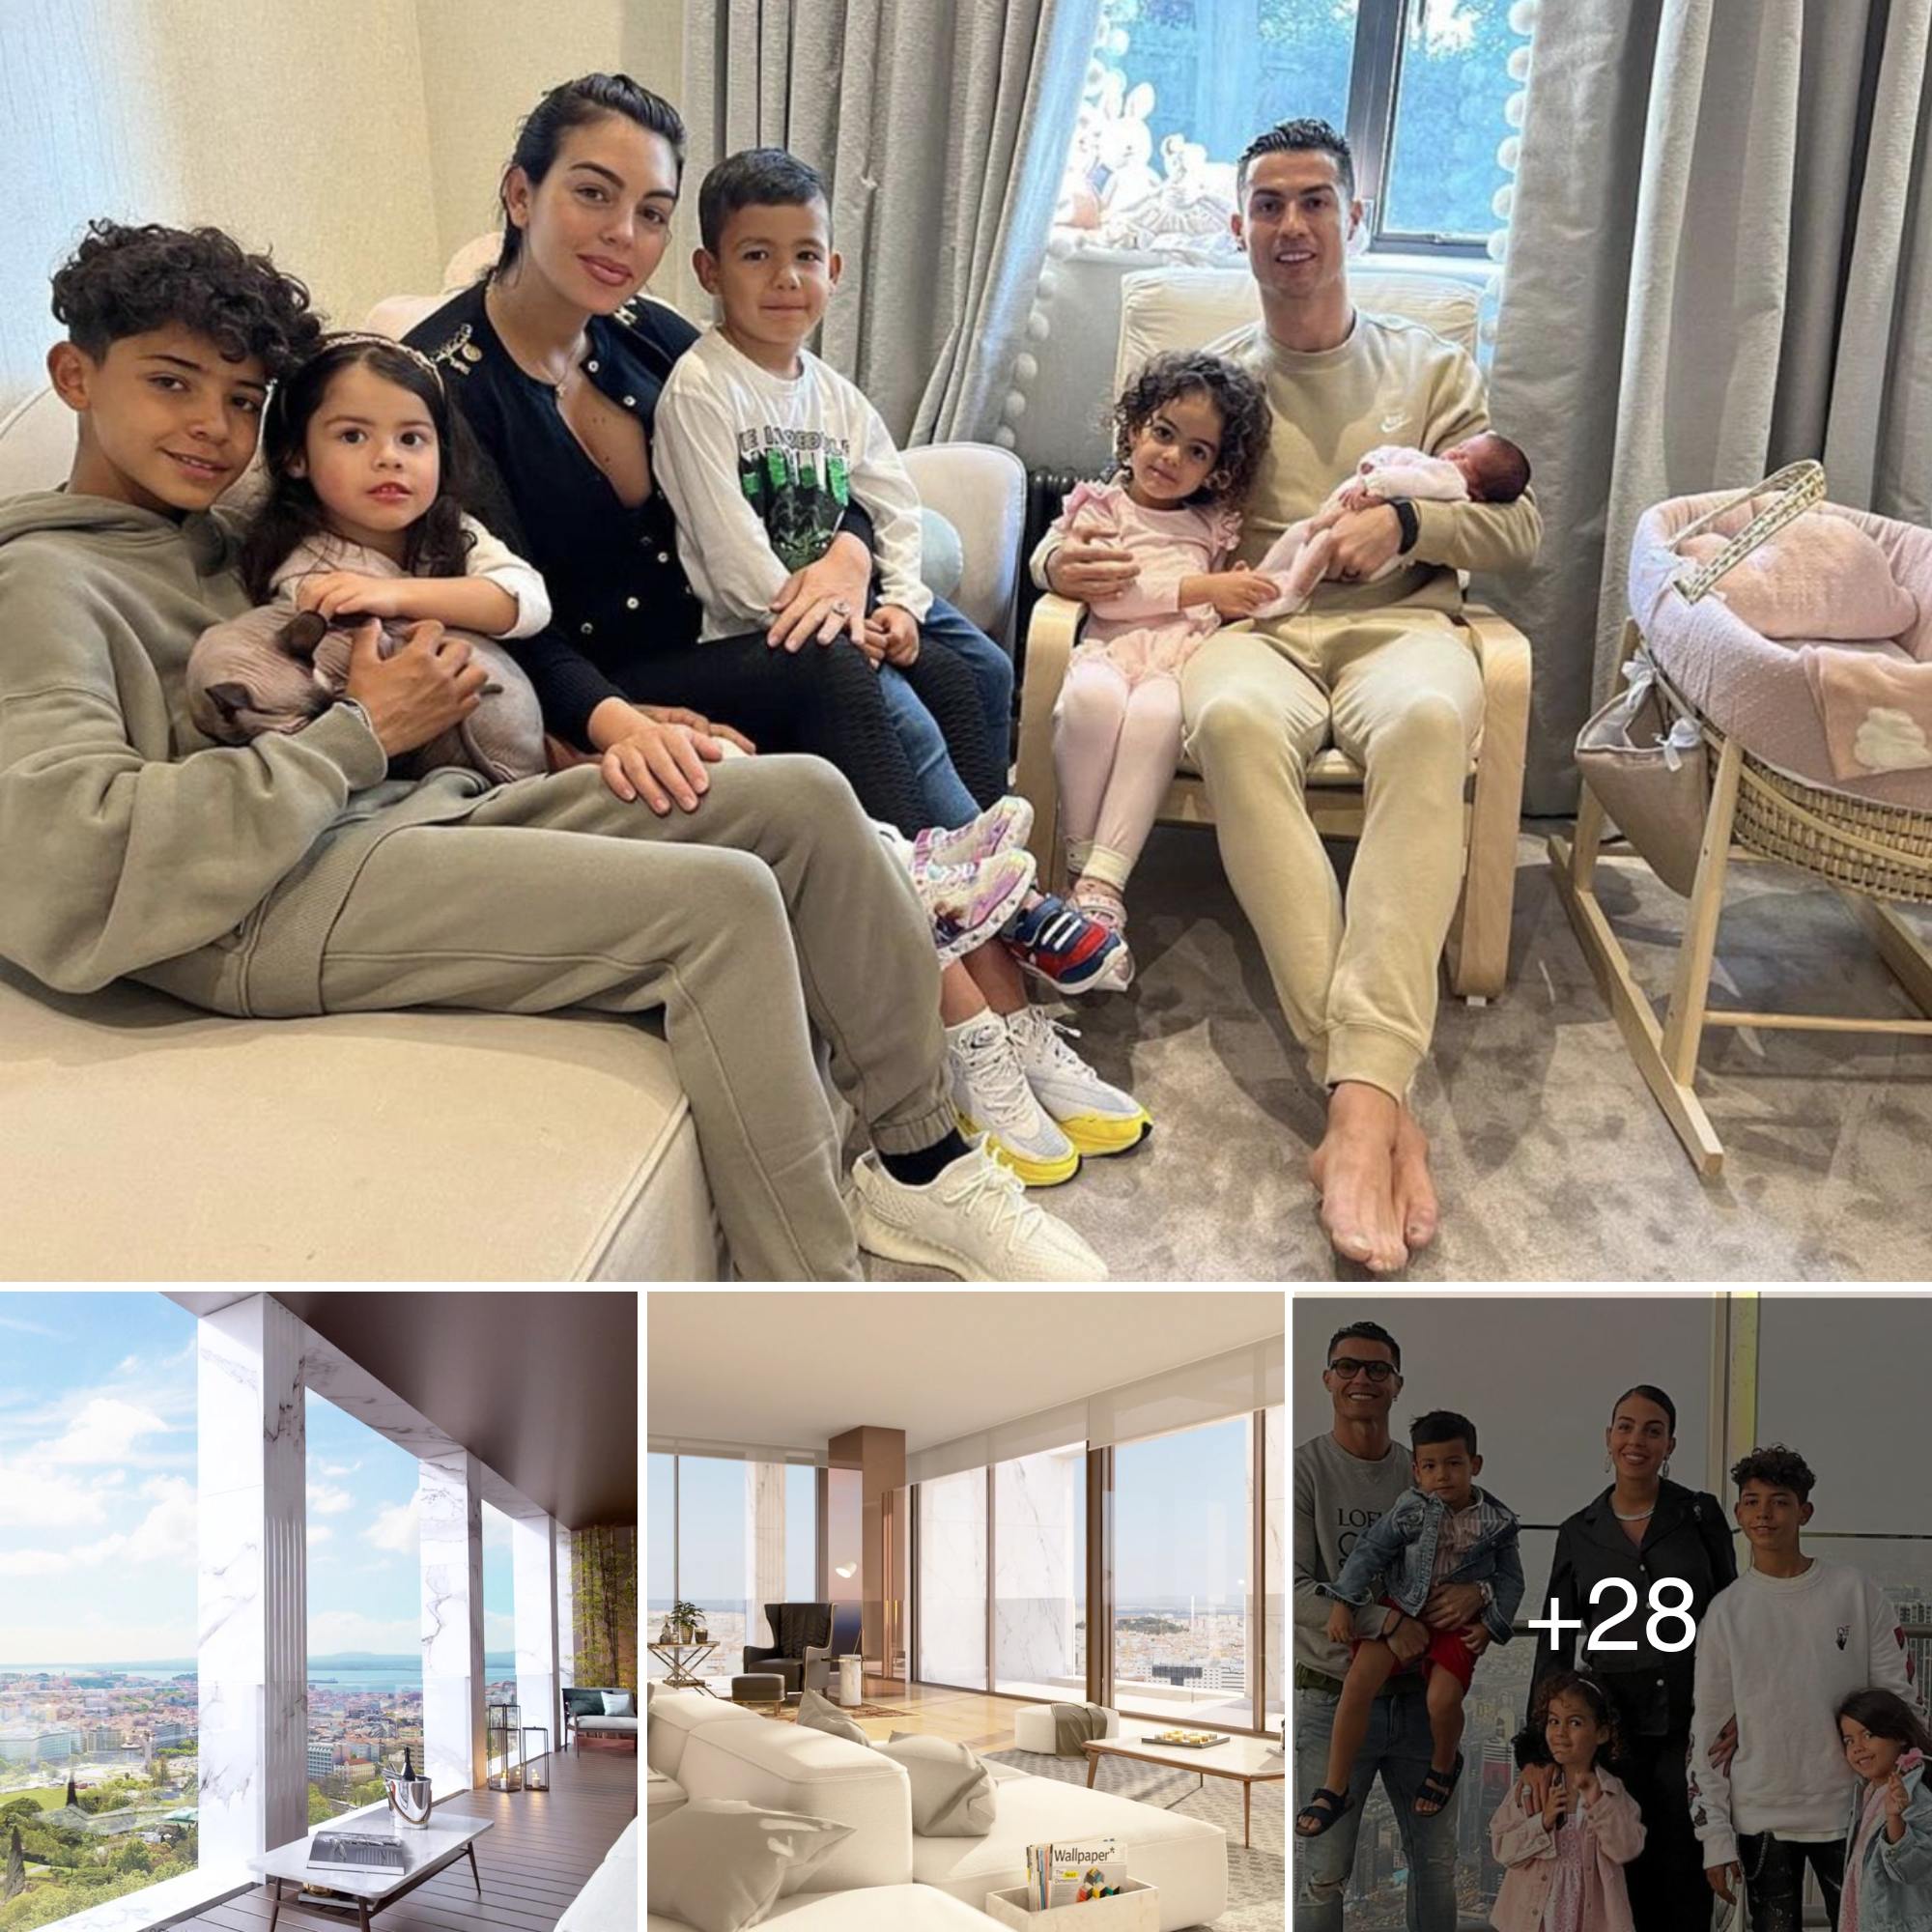 Cristiano Ronaldo’s Amazing £6m Penthouse Is The Most Expensive Flat In Portugal Close To Bedsit He Lived In As Kid